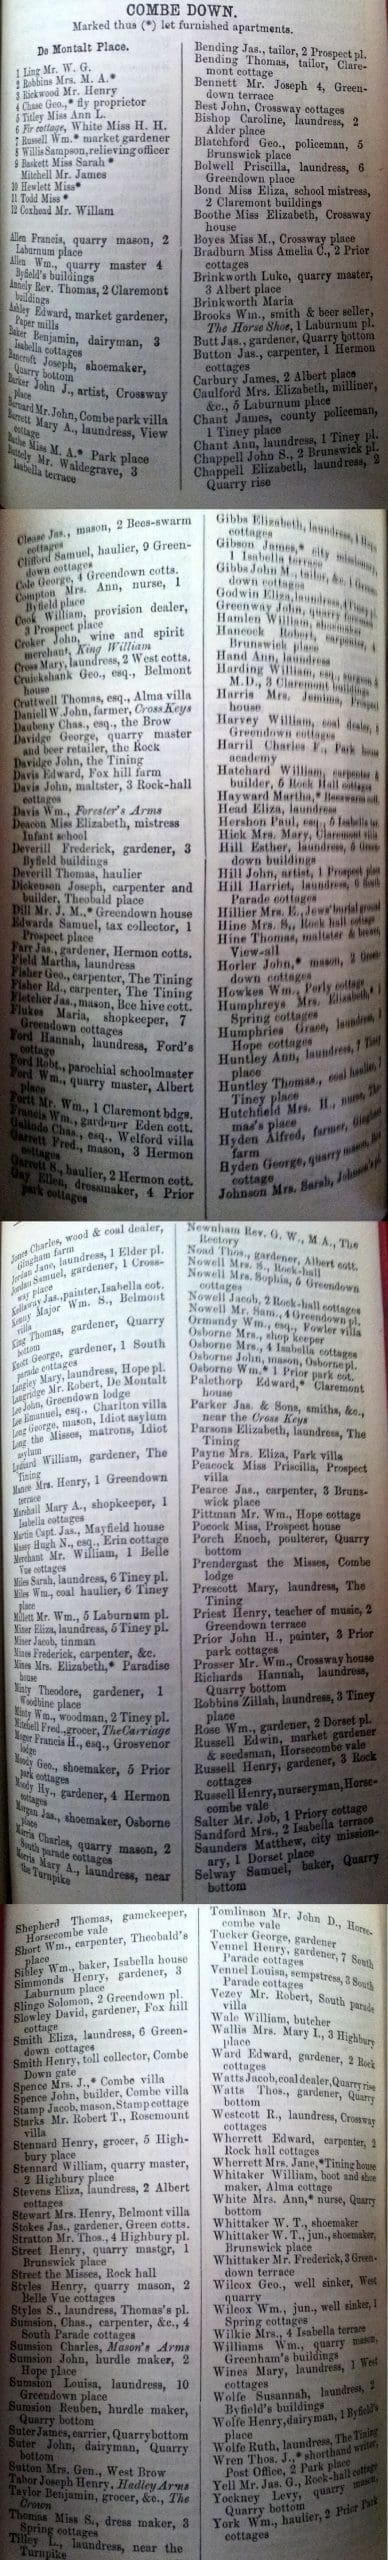 1866 post office directory for combe down